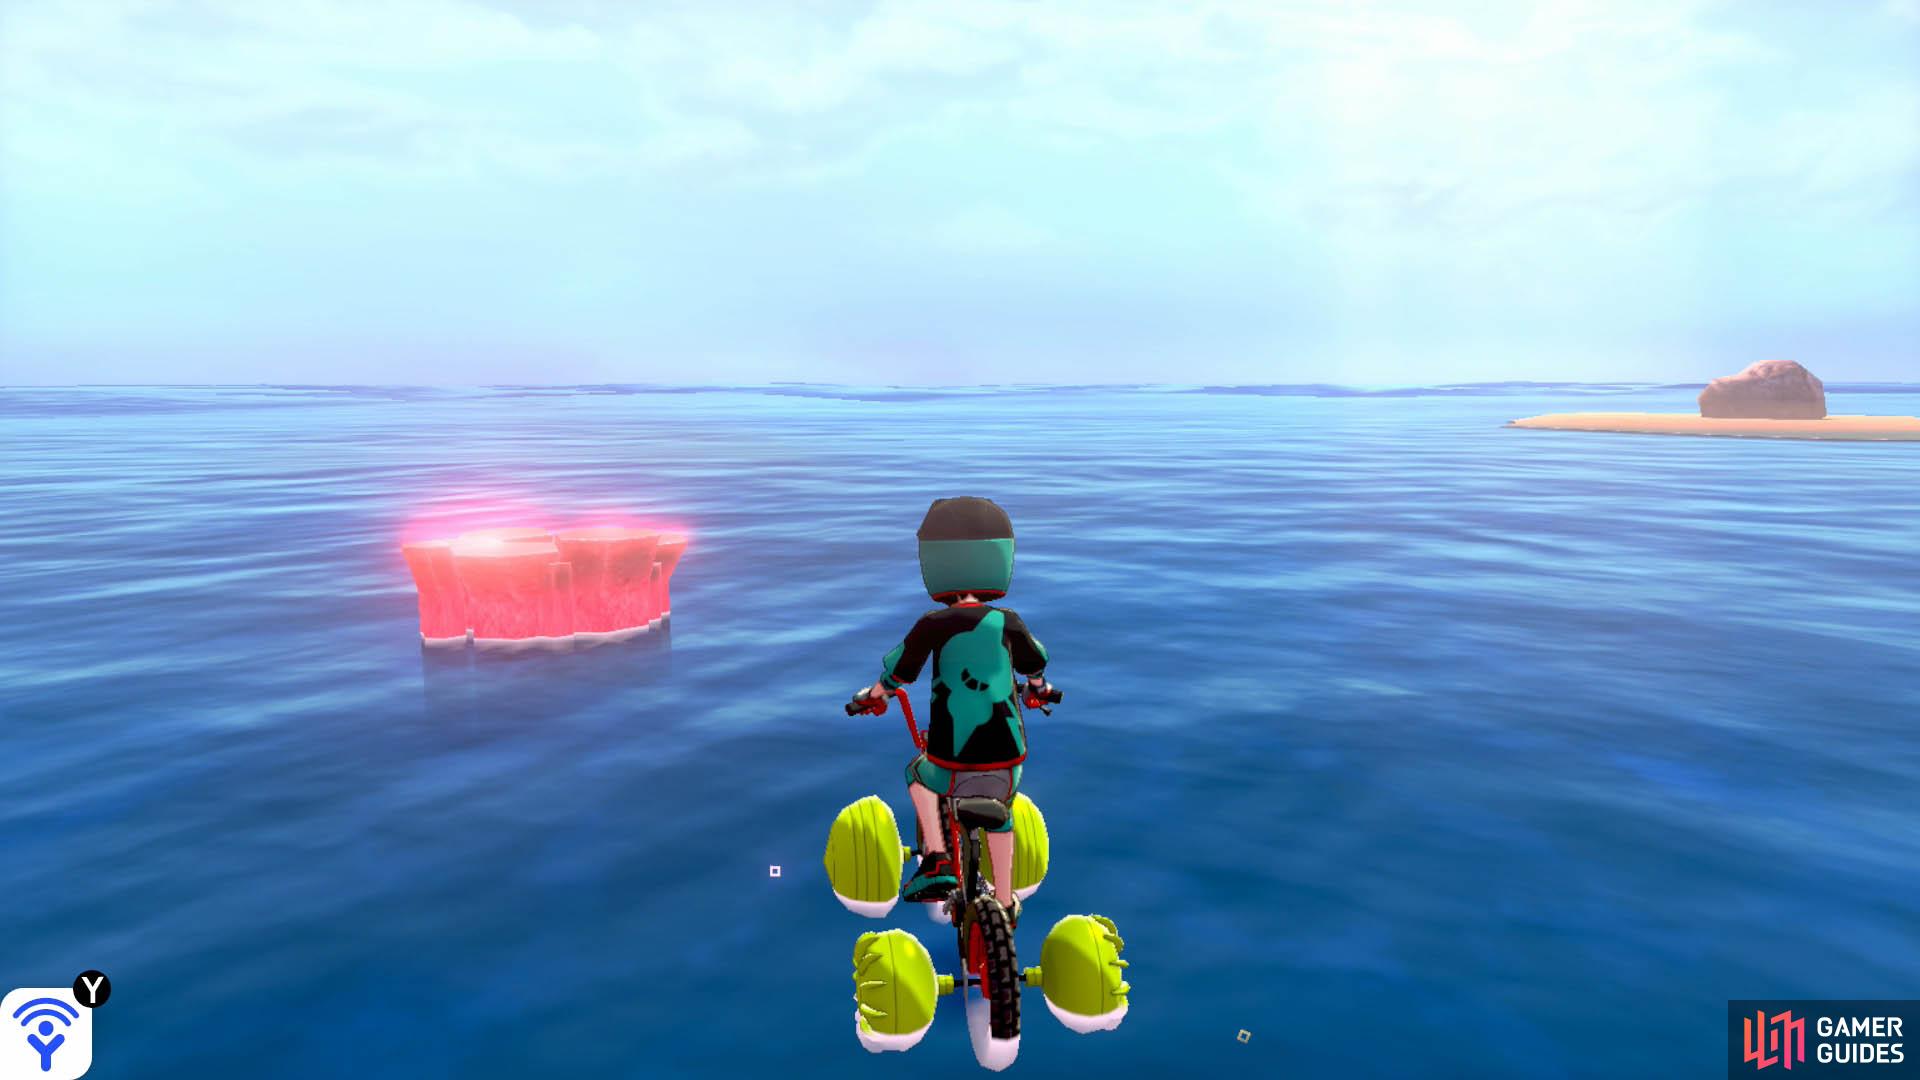 Return to the first islet, directly opposite Armor Station. Straight ahead, in the distance, there should be a den that’s near an islet with a boulder. That’s the den you’re looking for. Expect an incoming Sharpedo.